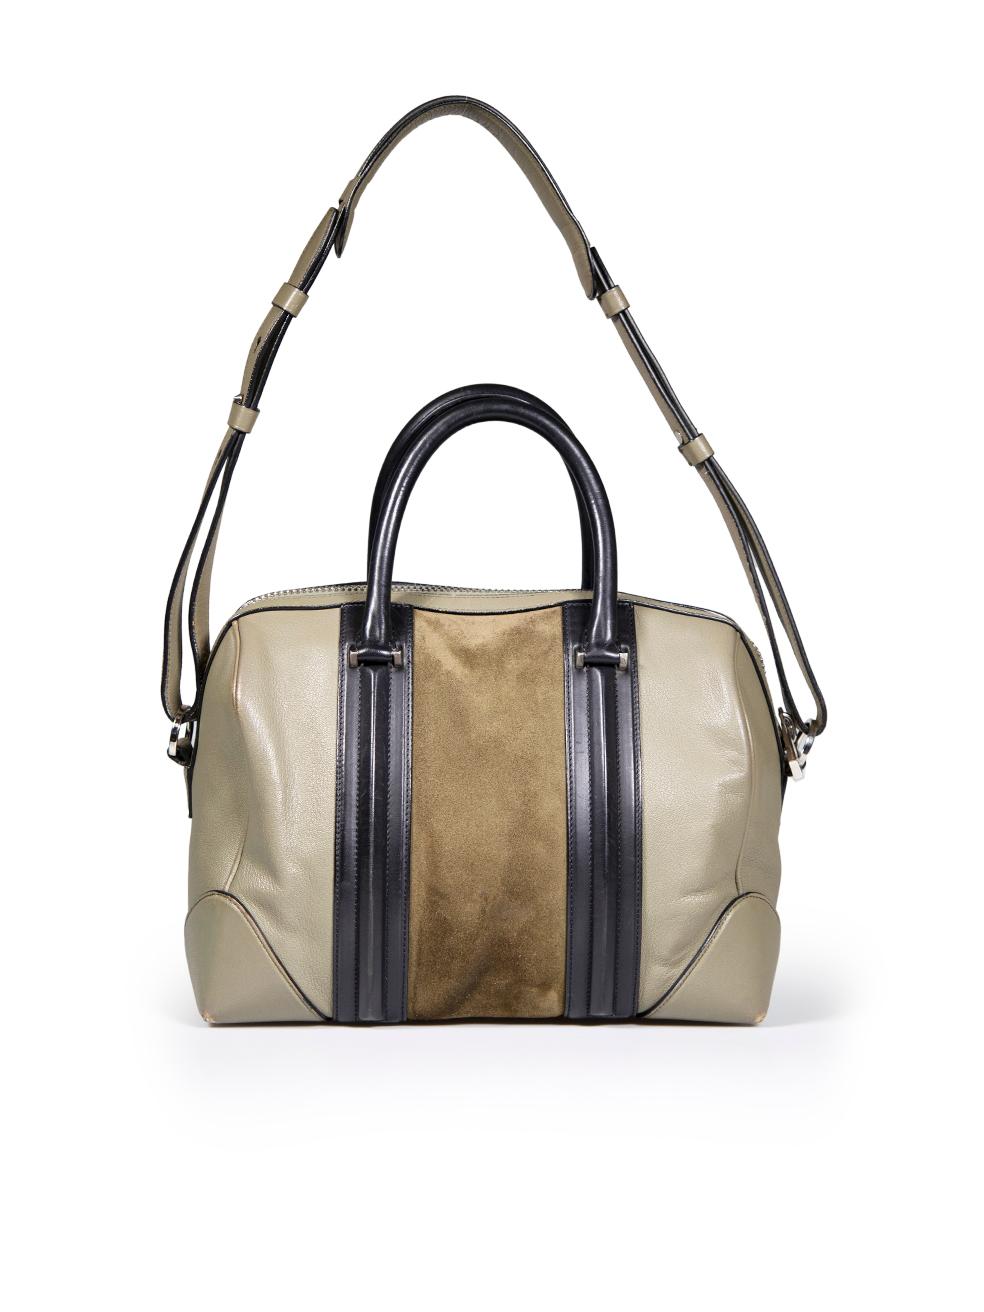 Givenchy Khaki Leather Medium Lucrezia Shoulder Bag In Good Condition For Sale In London, GB